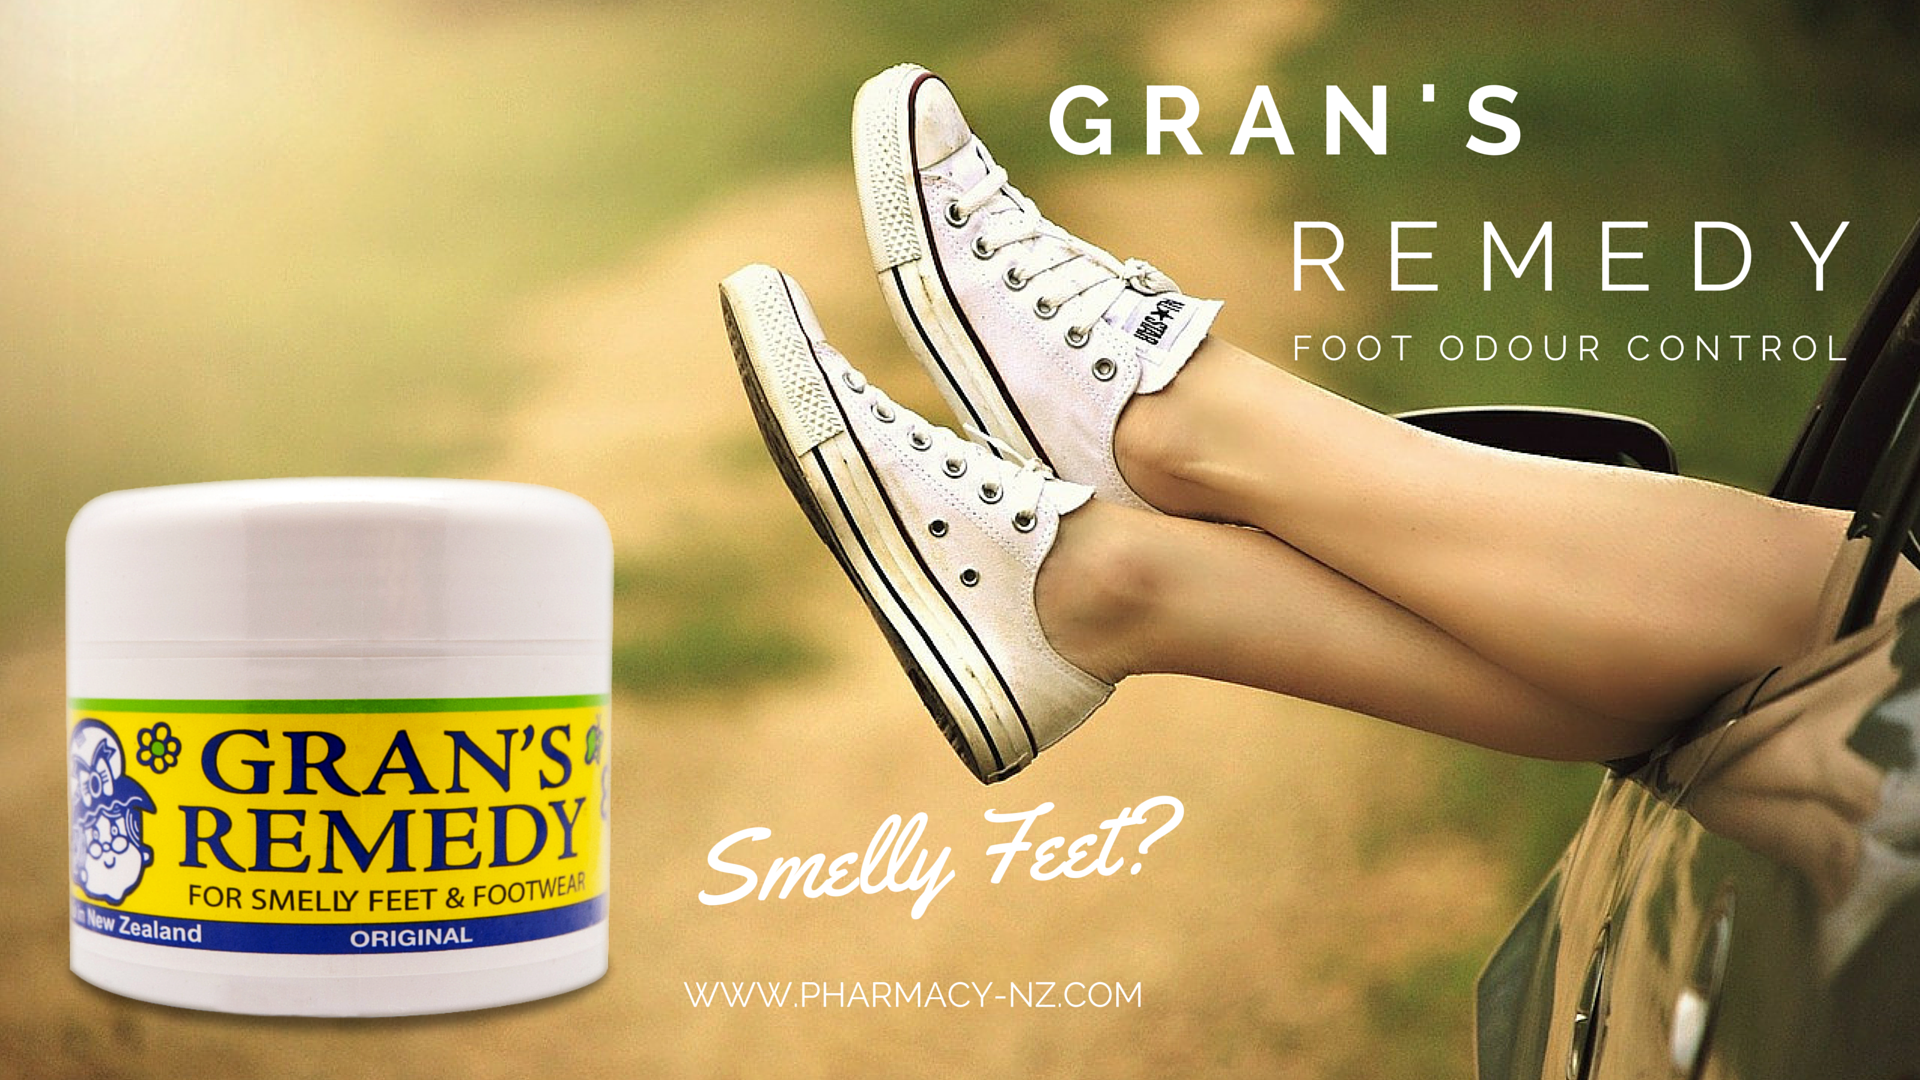 Grans Remedy Treatment for Smelly Feet